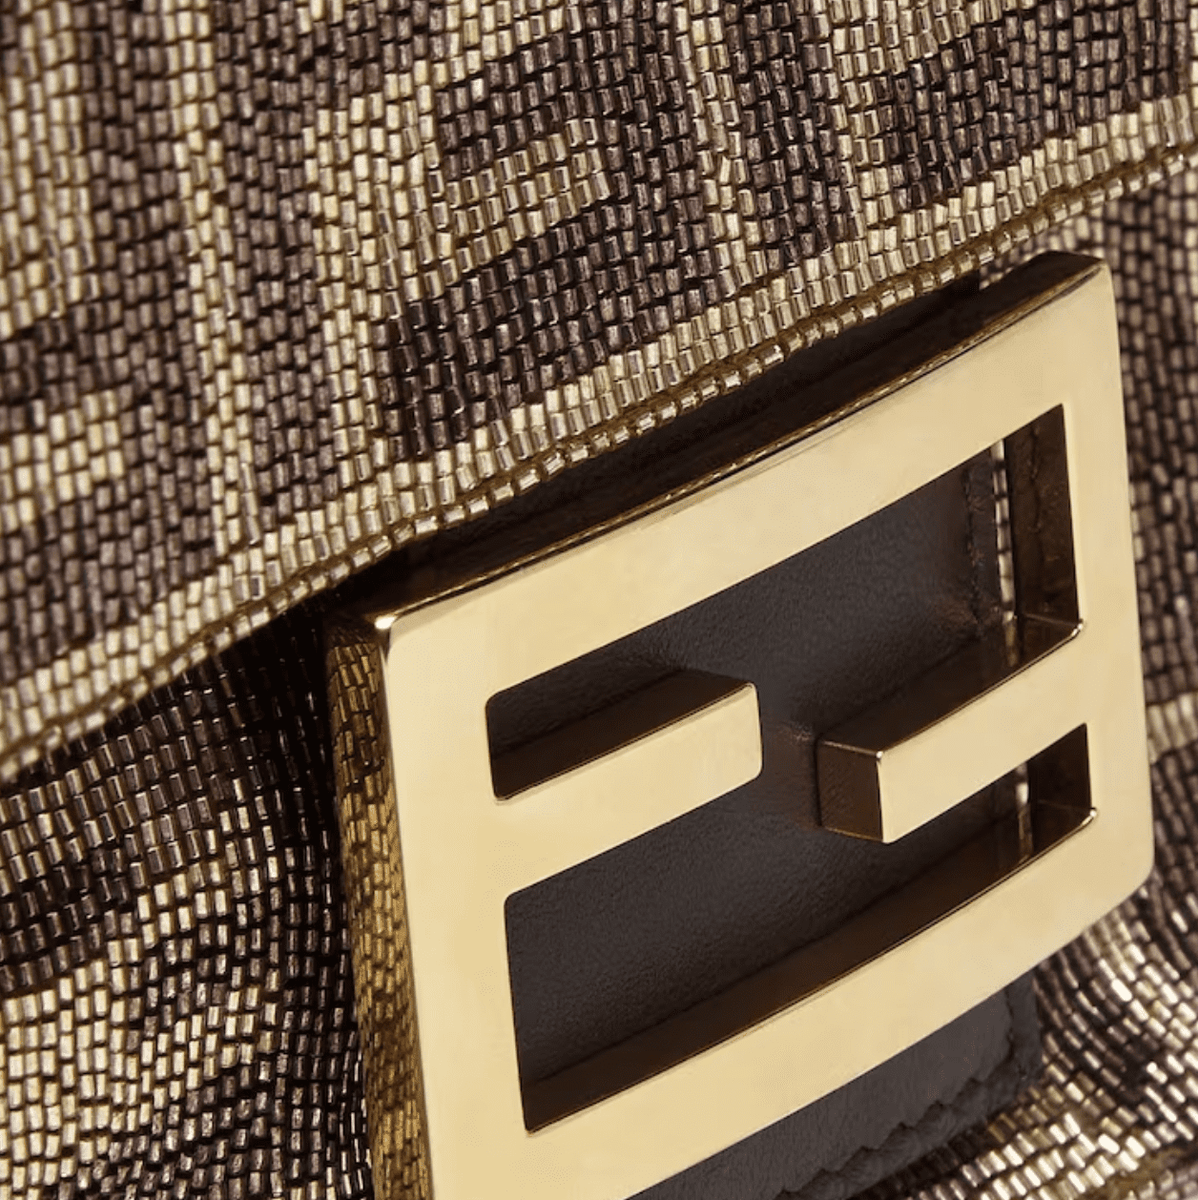 How to Tell if a Fendi Bag is Real? – LegitGrails